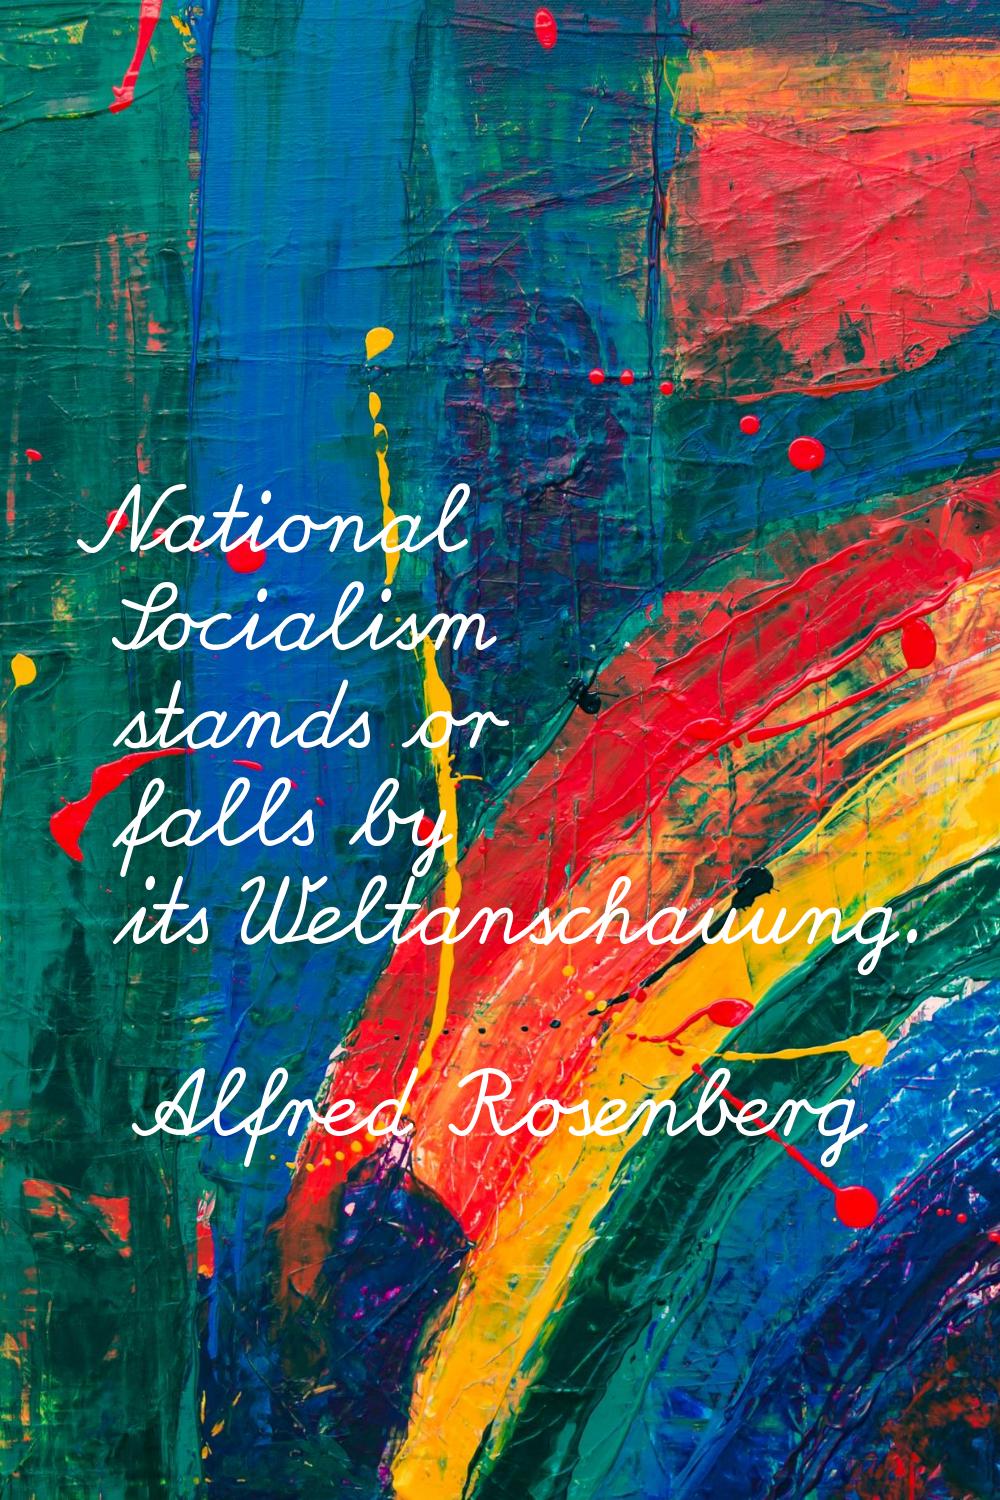 National Socialism stands or falls by its Weltanschauung.